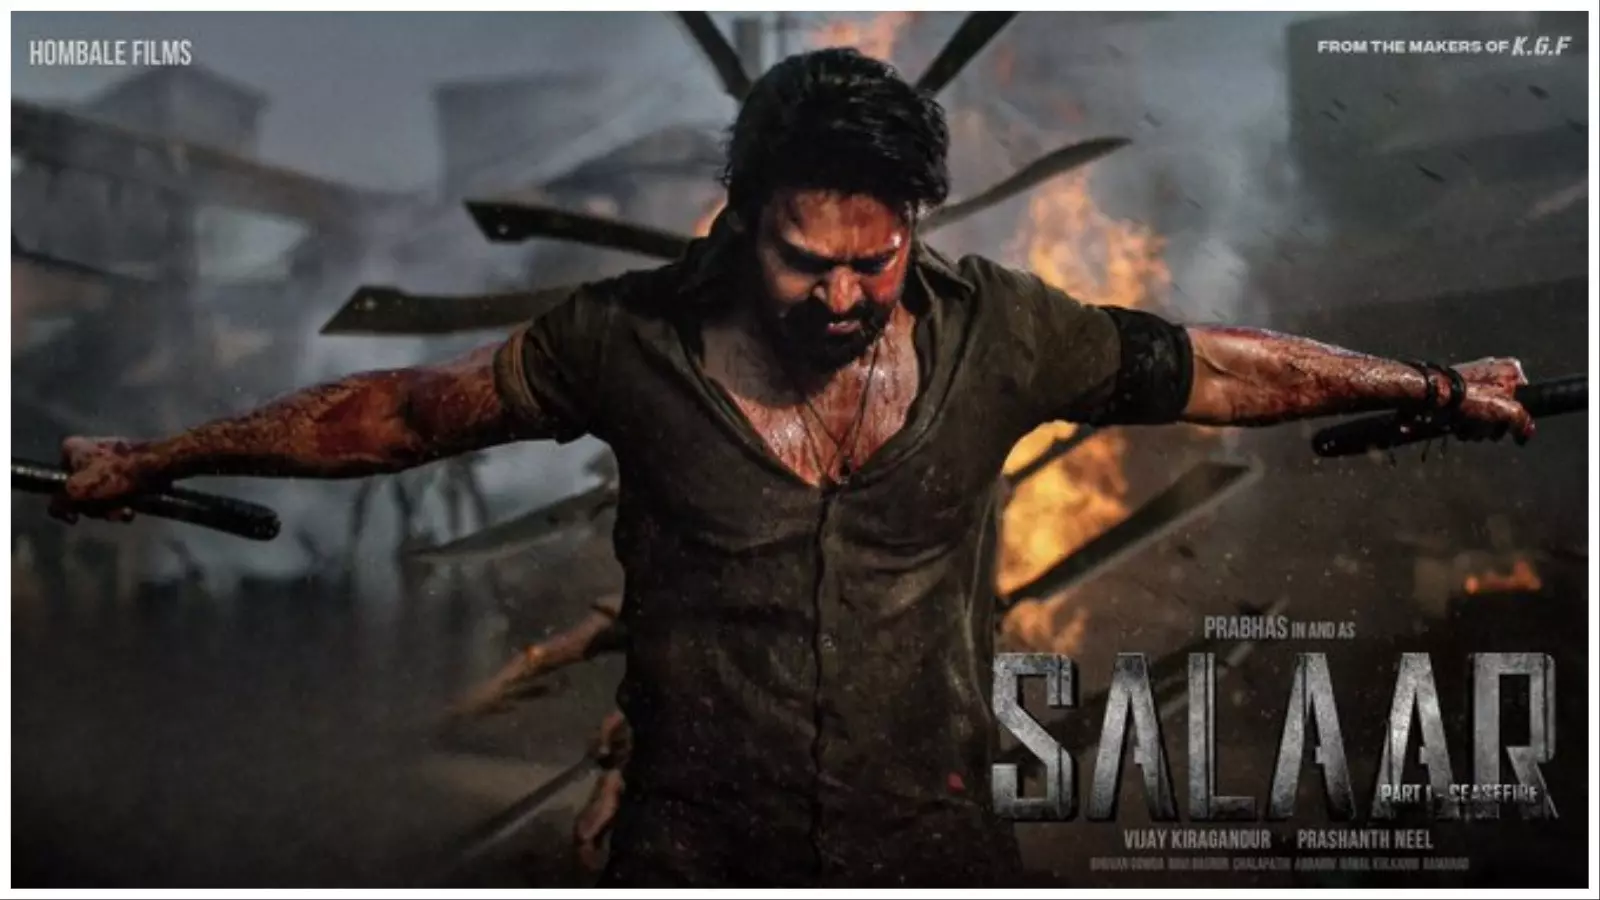 Box-Office: Salaar: Part 1 - Ceasefire may collect big number on release day